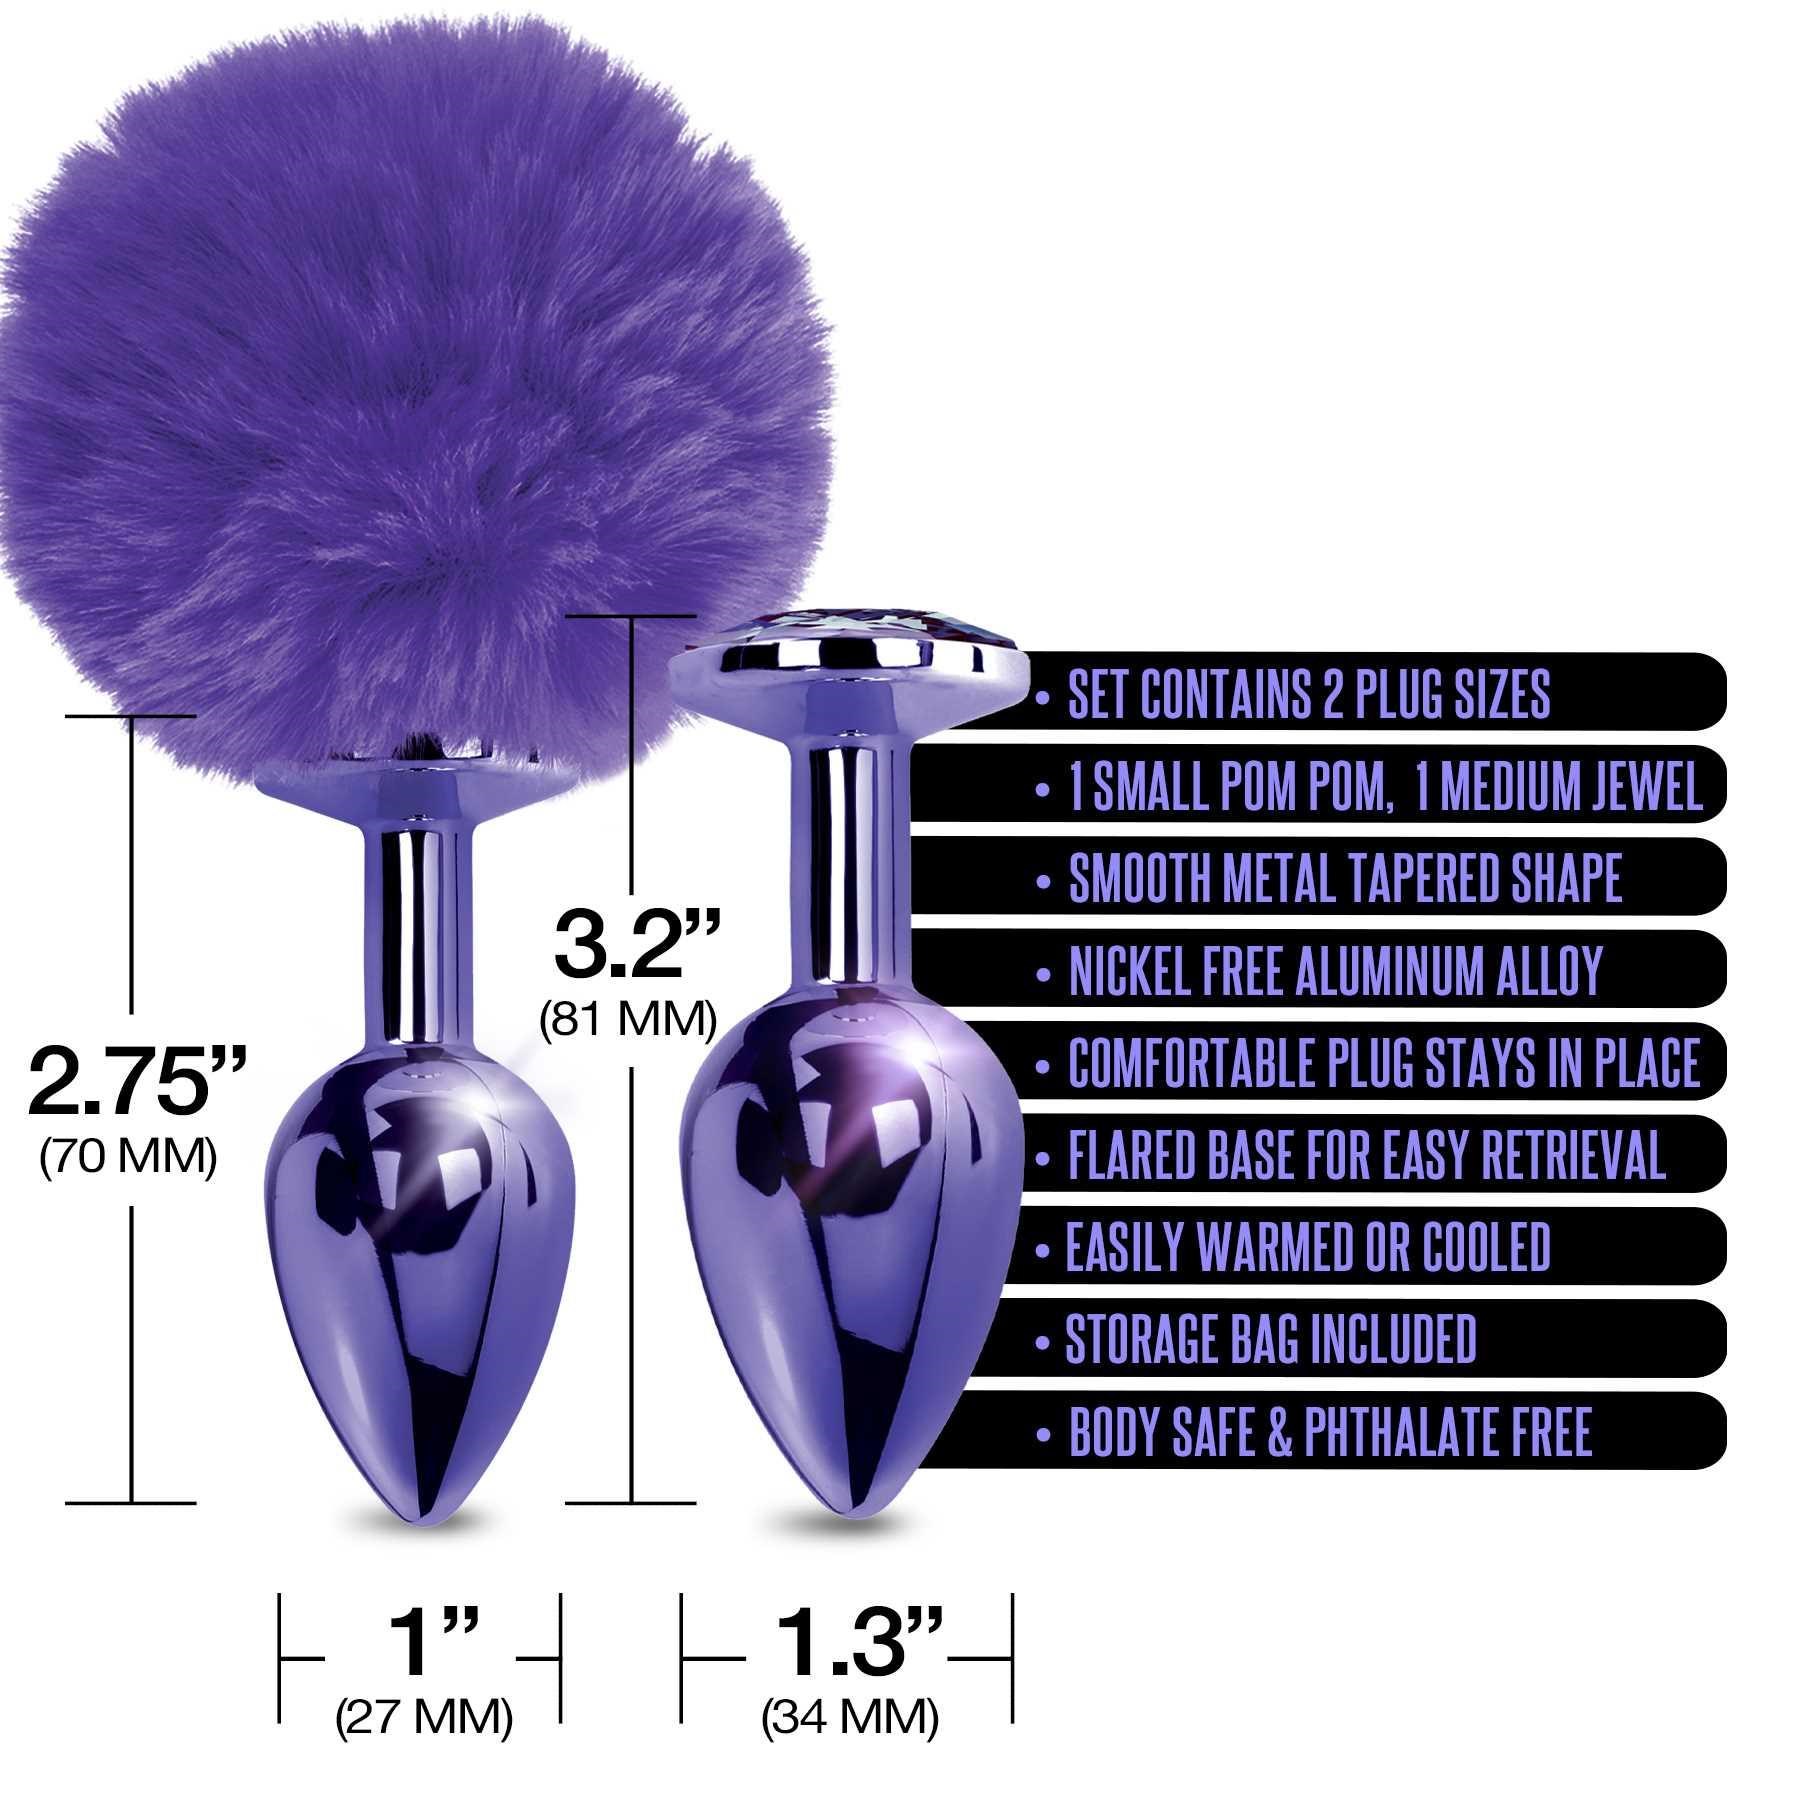 NIXIE Metal Butt Plug Set Pom Pom and Jewel Inlaid Metallic purple features call out sheet